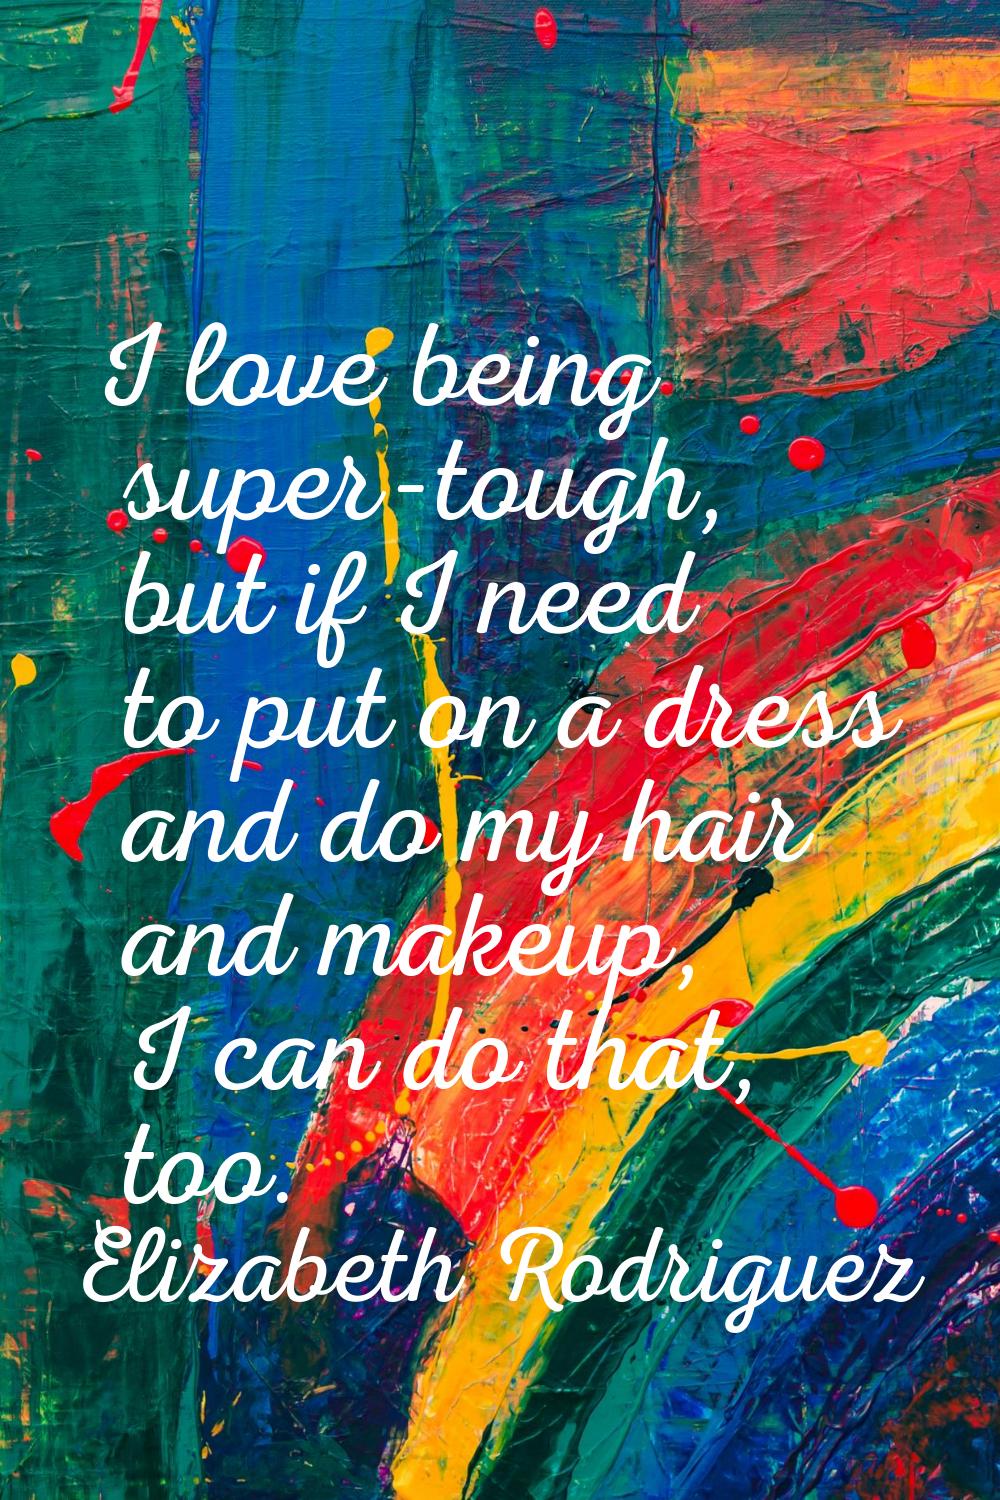 I love being super-tough, but if I need to put on a dress and do my hair and makeup, I can do that,